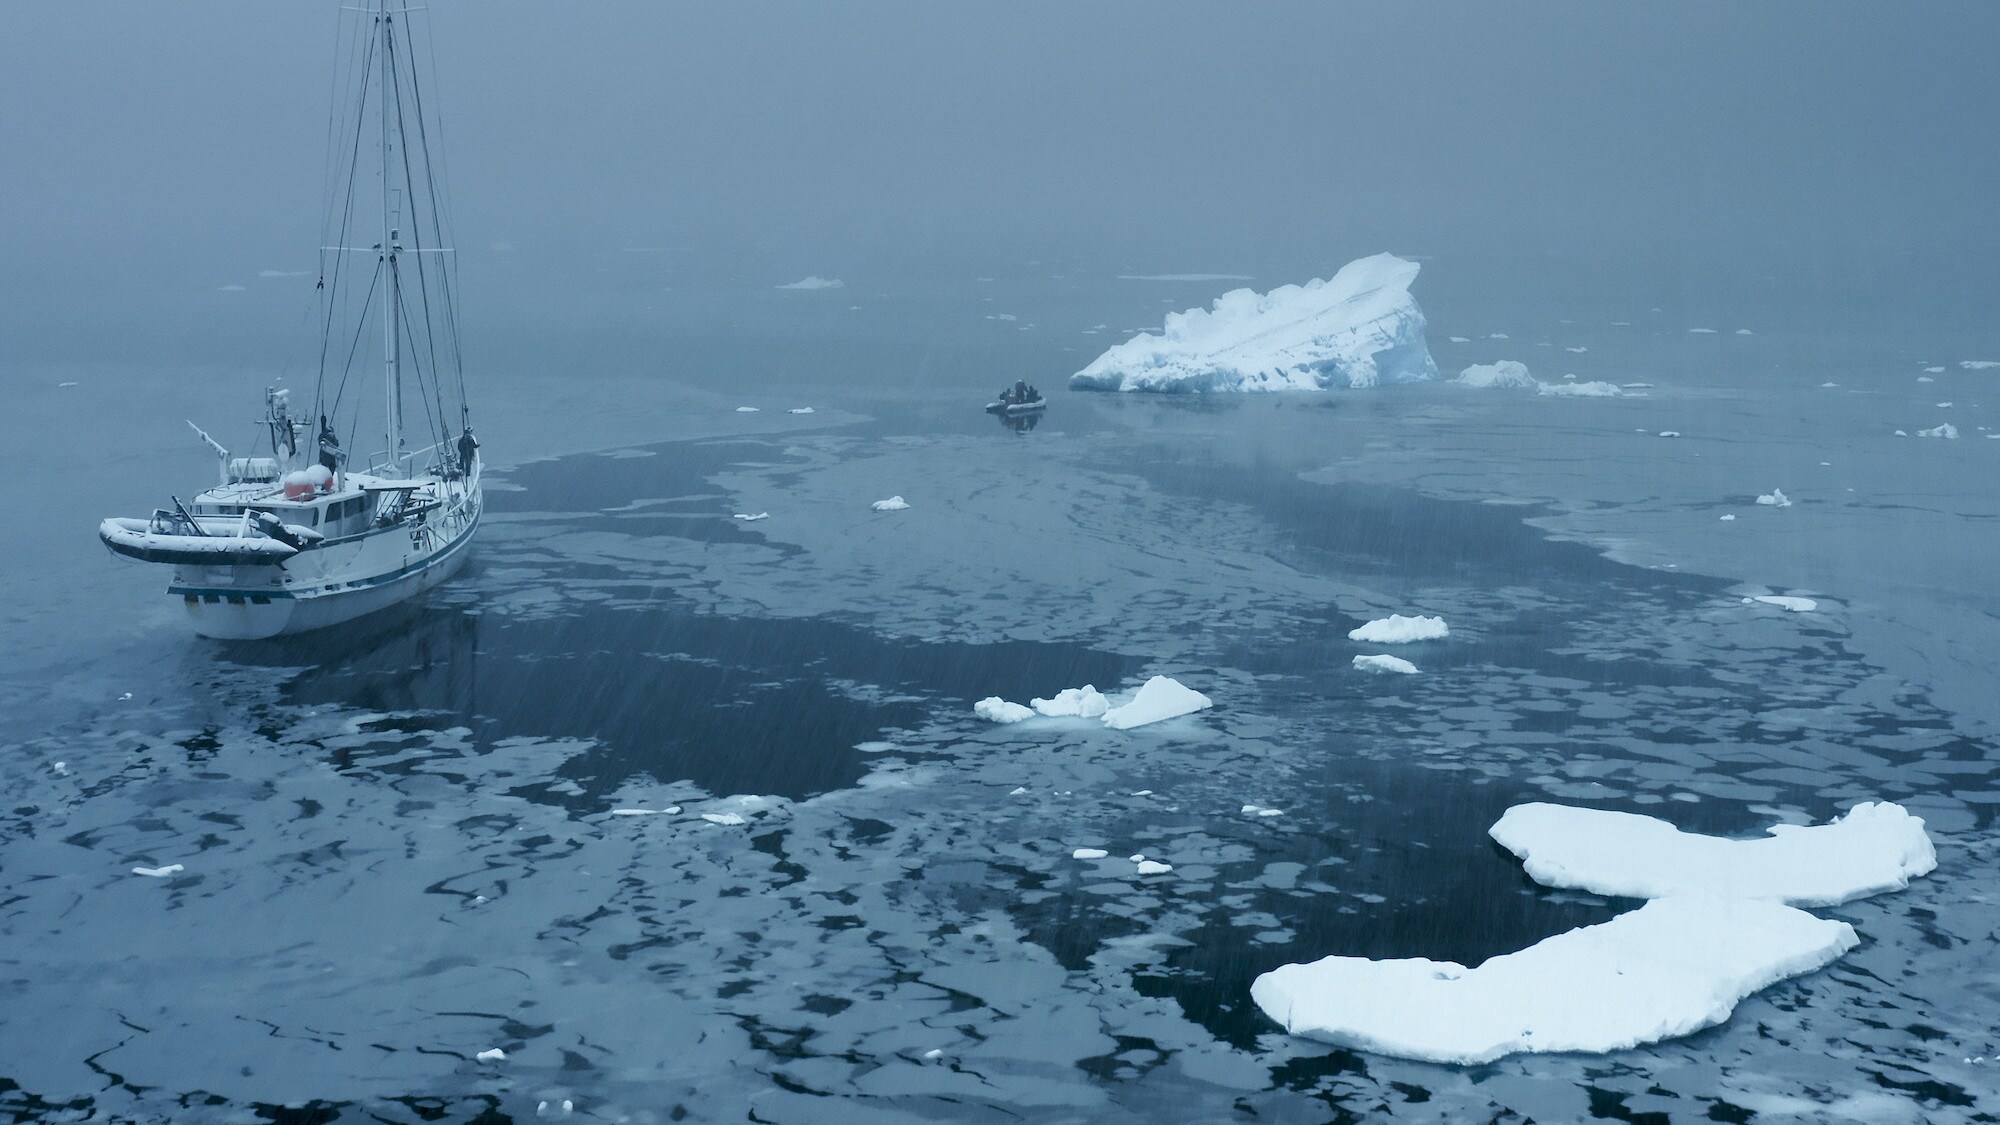 Film crew on the rib moving away from Australis and towards an iceberg. (credit: National Geographic for Disney+/Tom Walker)